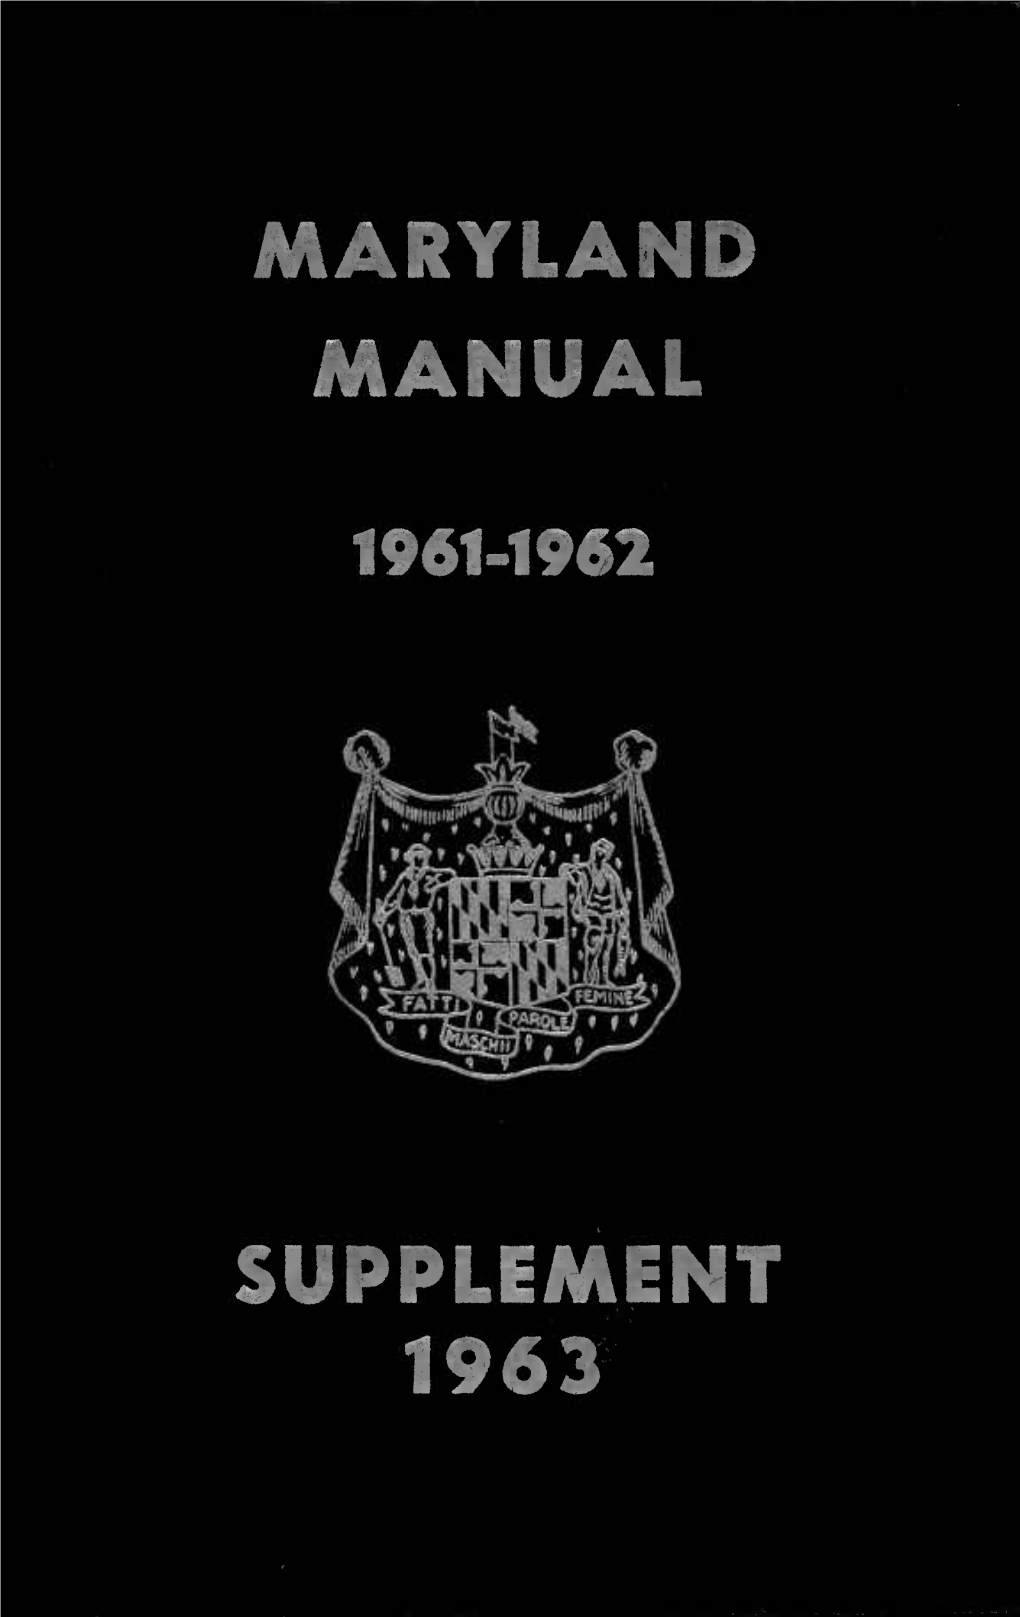 Maryland Manual 1961-1962 Supplement 1963